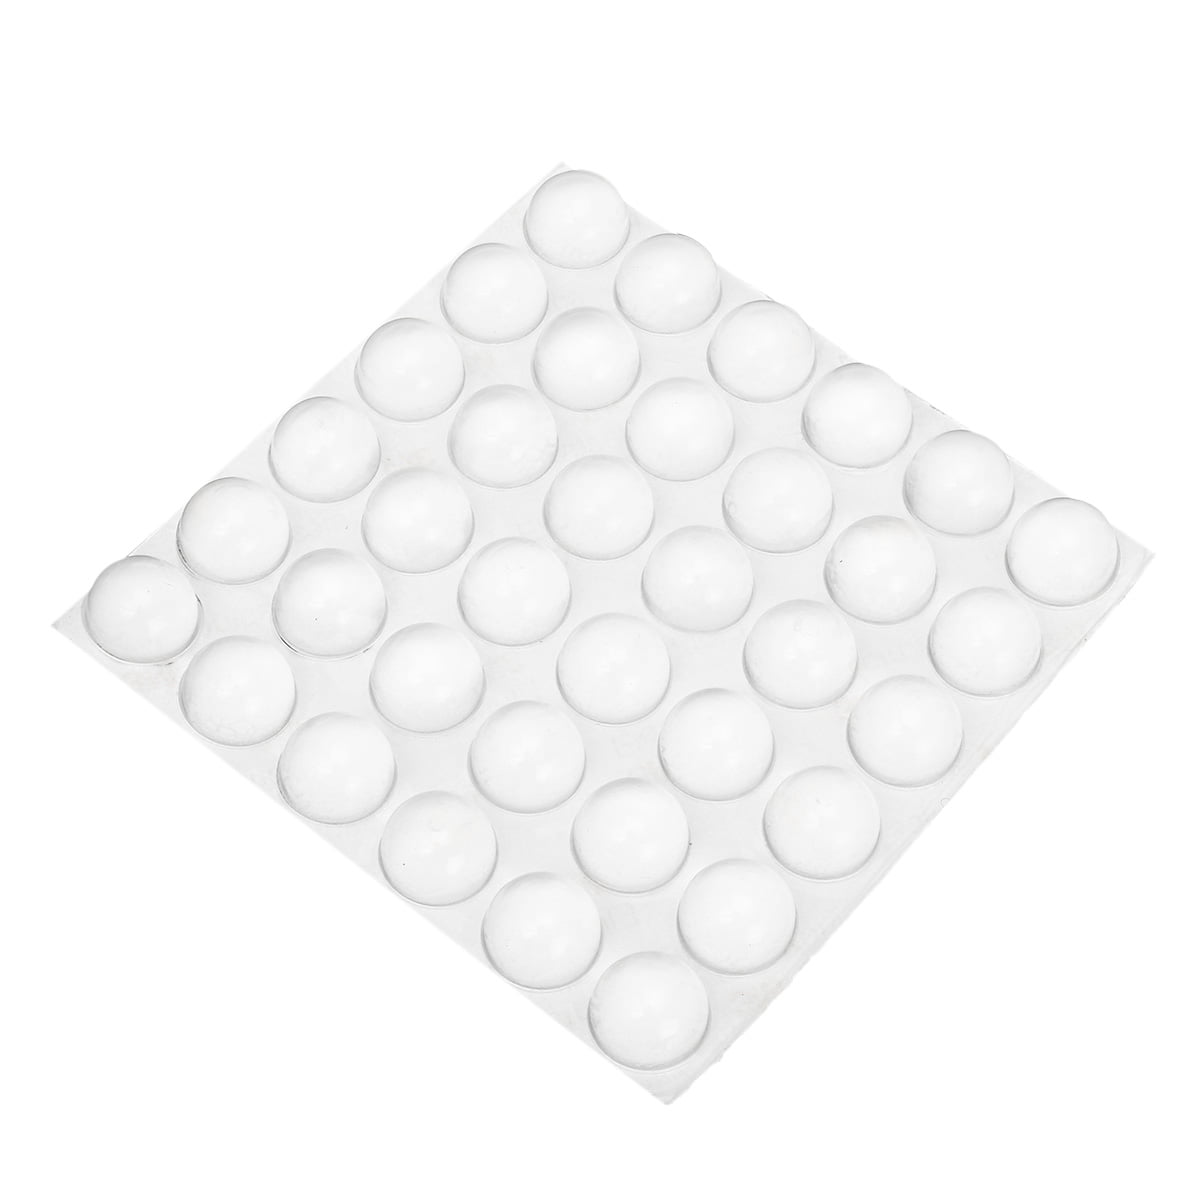 TUPARKA 50 Pcs Clear Self Adhesive Rubber Feet Bumper Pads Buffer Pads for Cabinet Door,Drawers,Glass Tops,8 x 3mm 